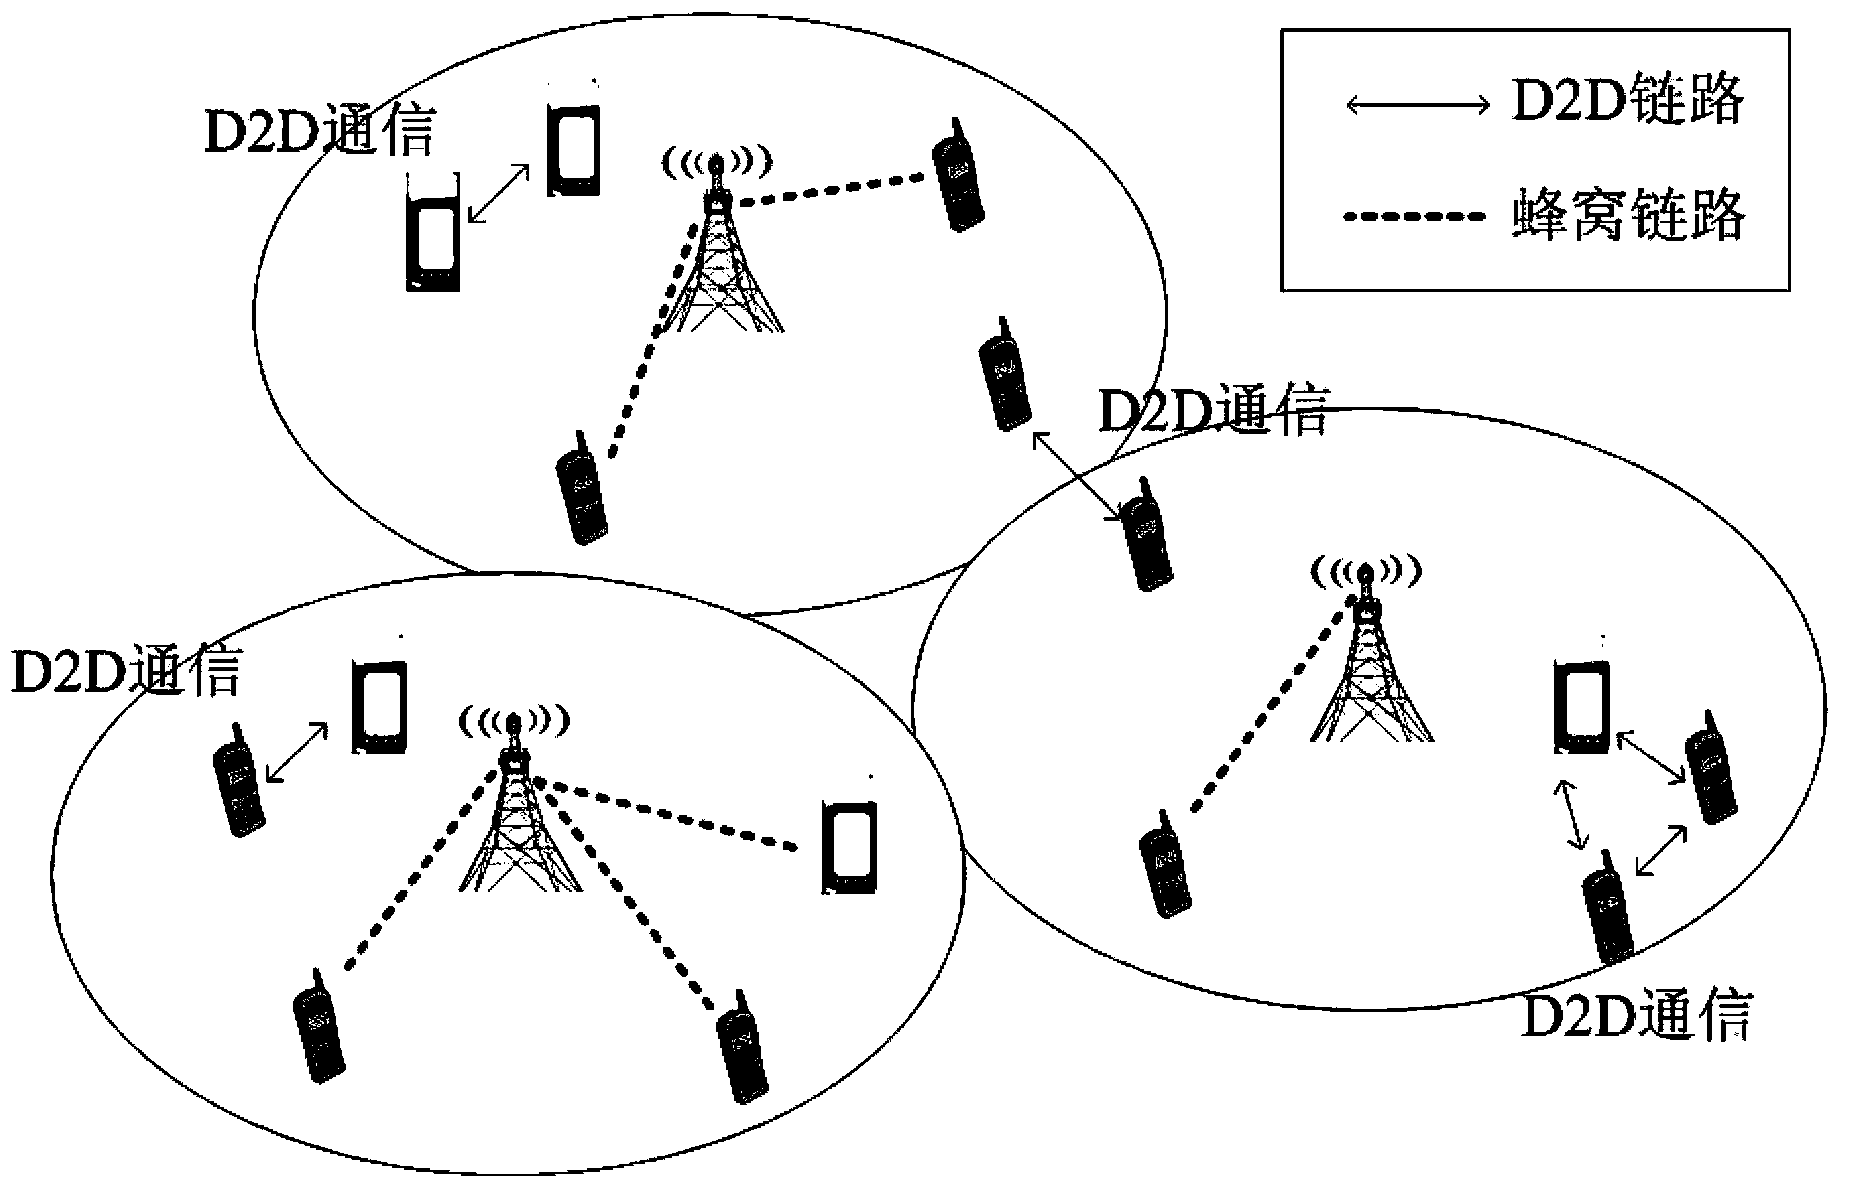 Base station assisted method for discovering equipment in D2D communication system